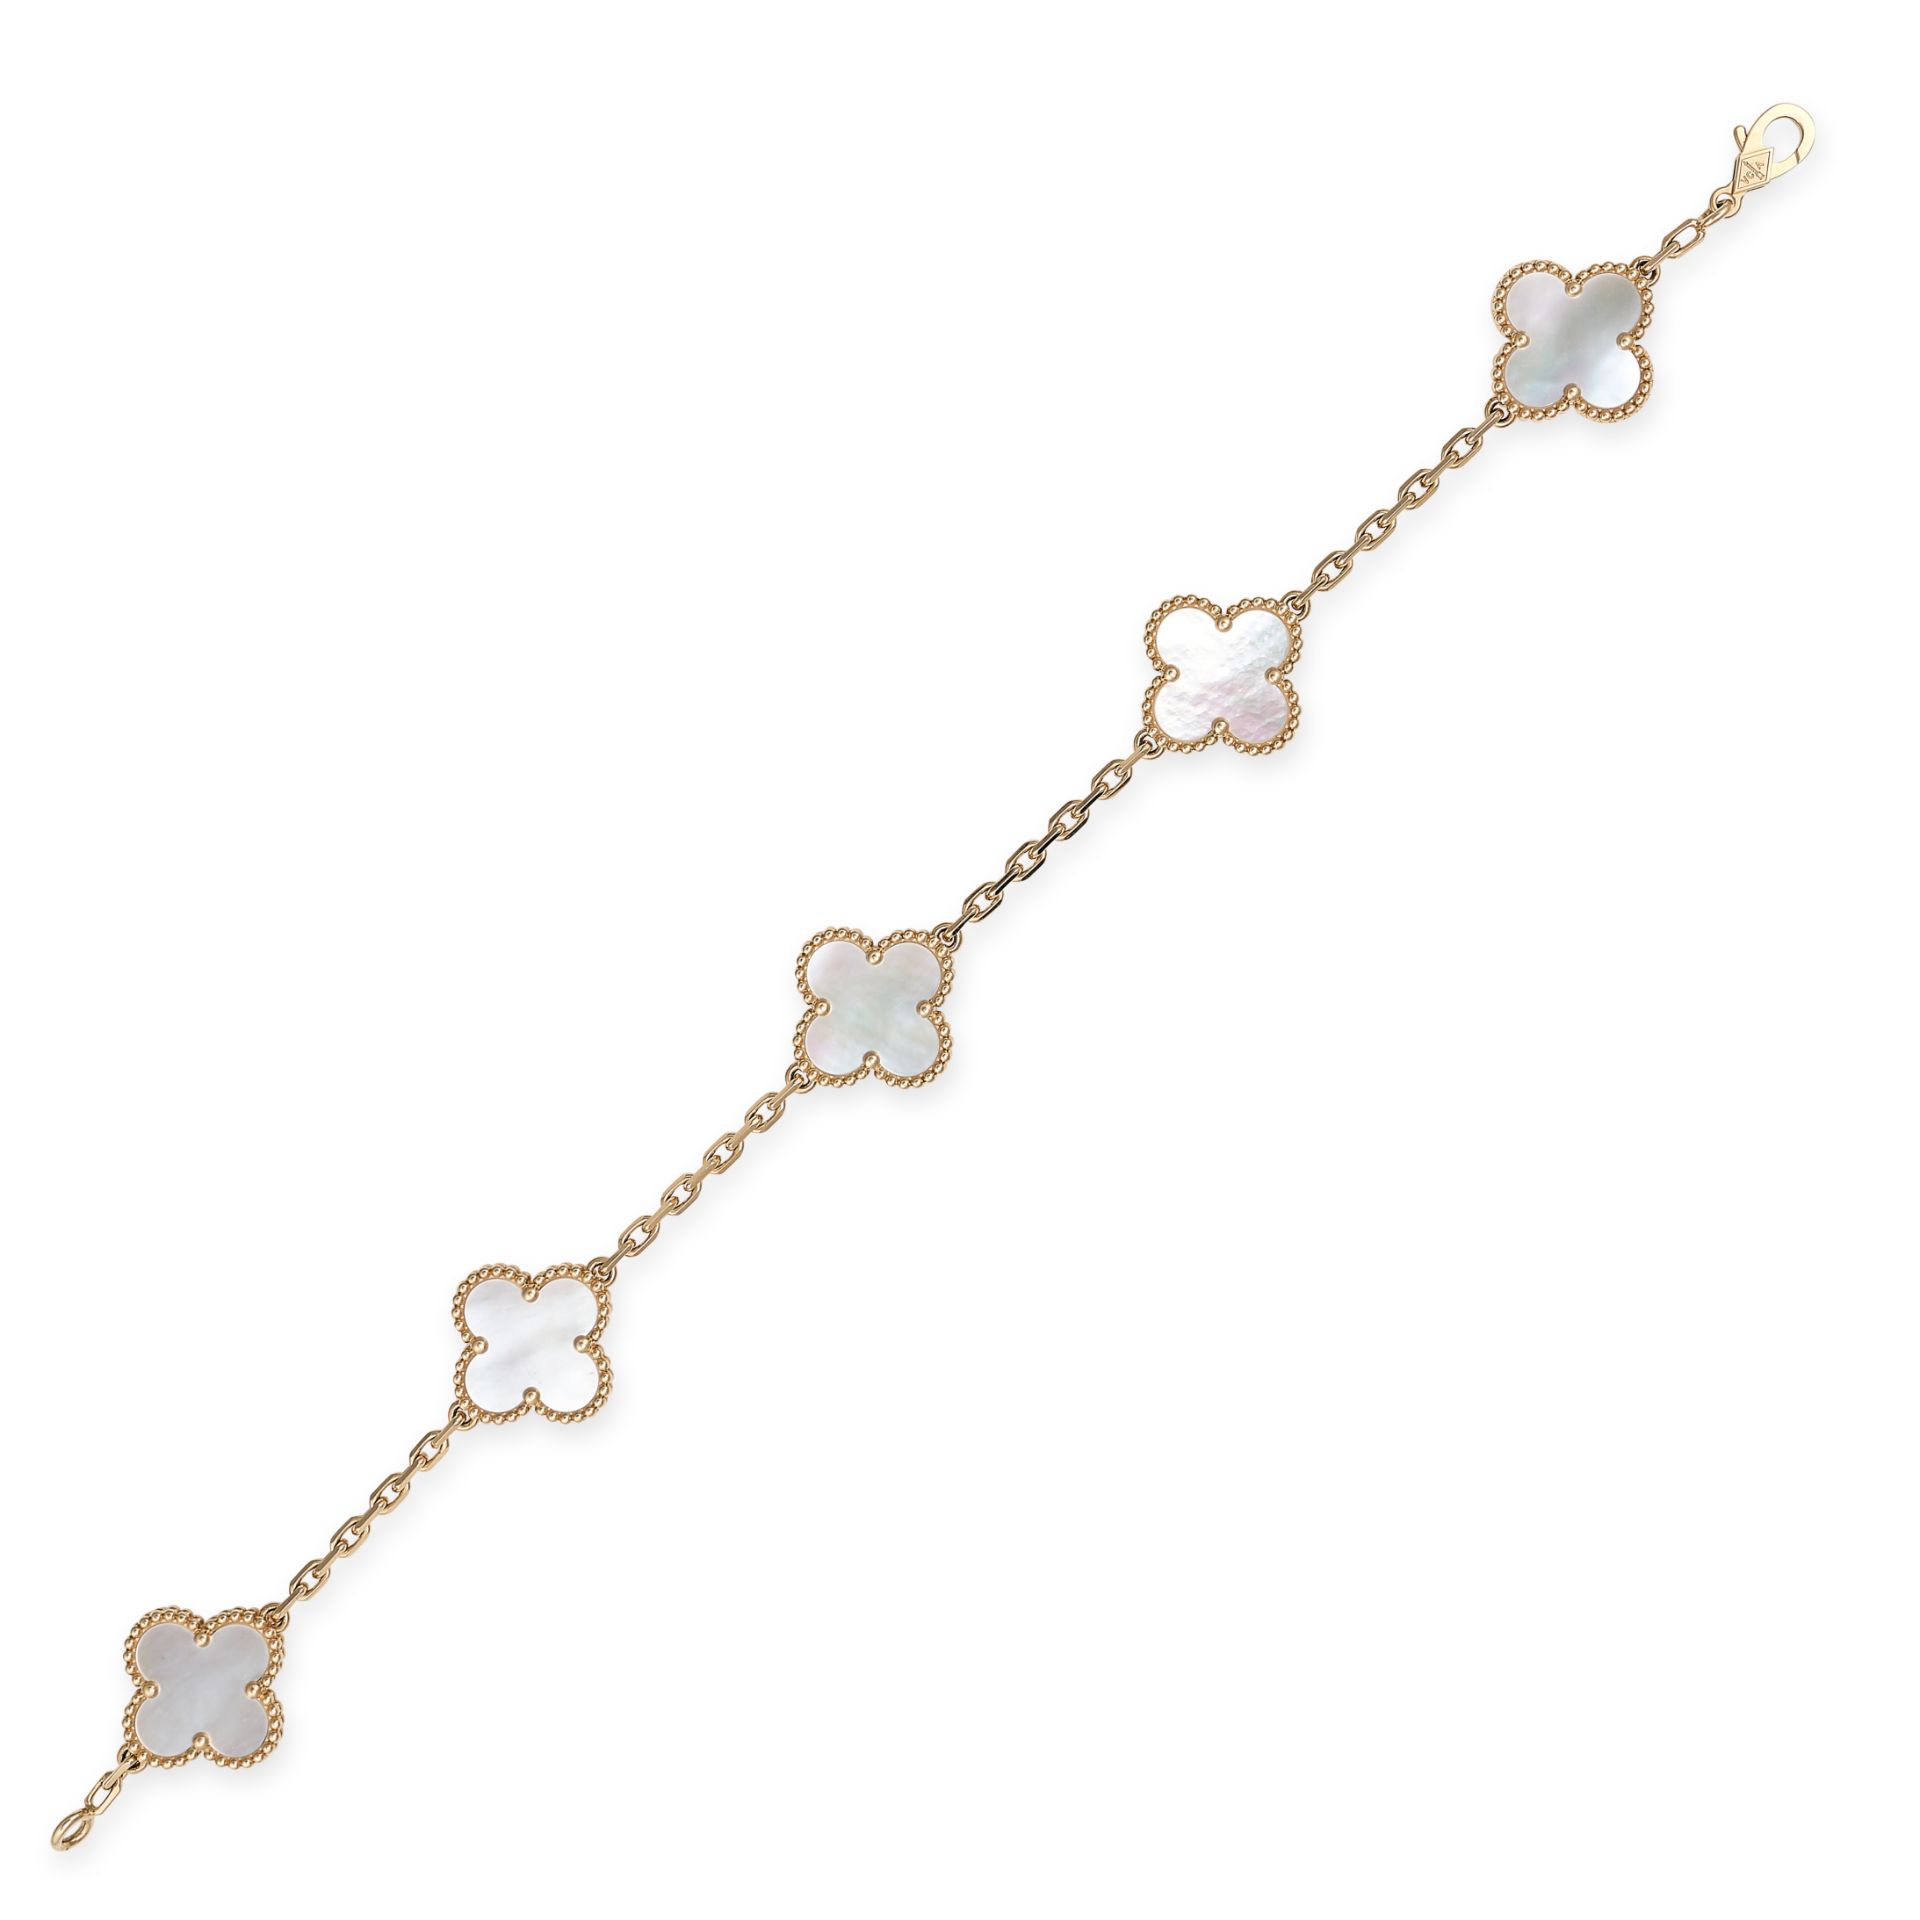 VAN CLEEF & ARPELS, A MOTHER OF PEARL ALHAMBRA BRACELET in 18ct yellow gold, comprising five